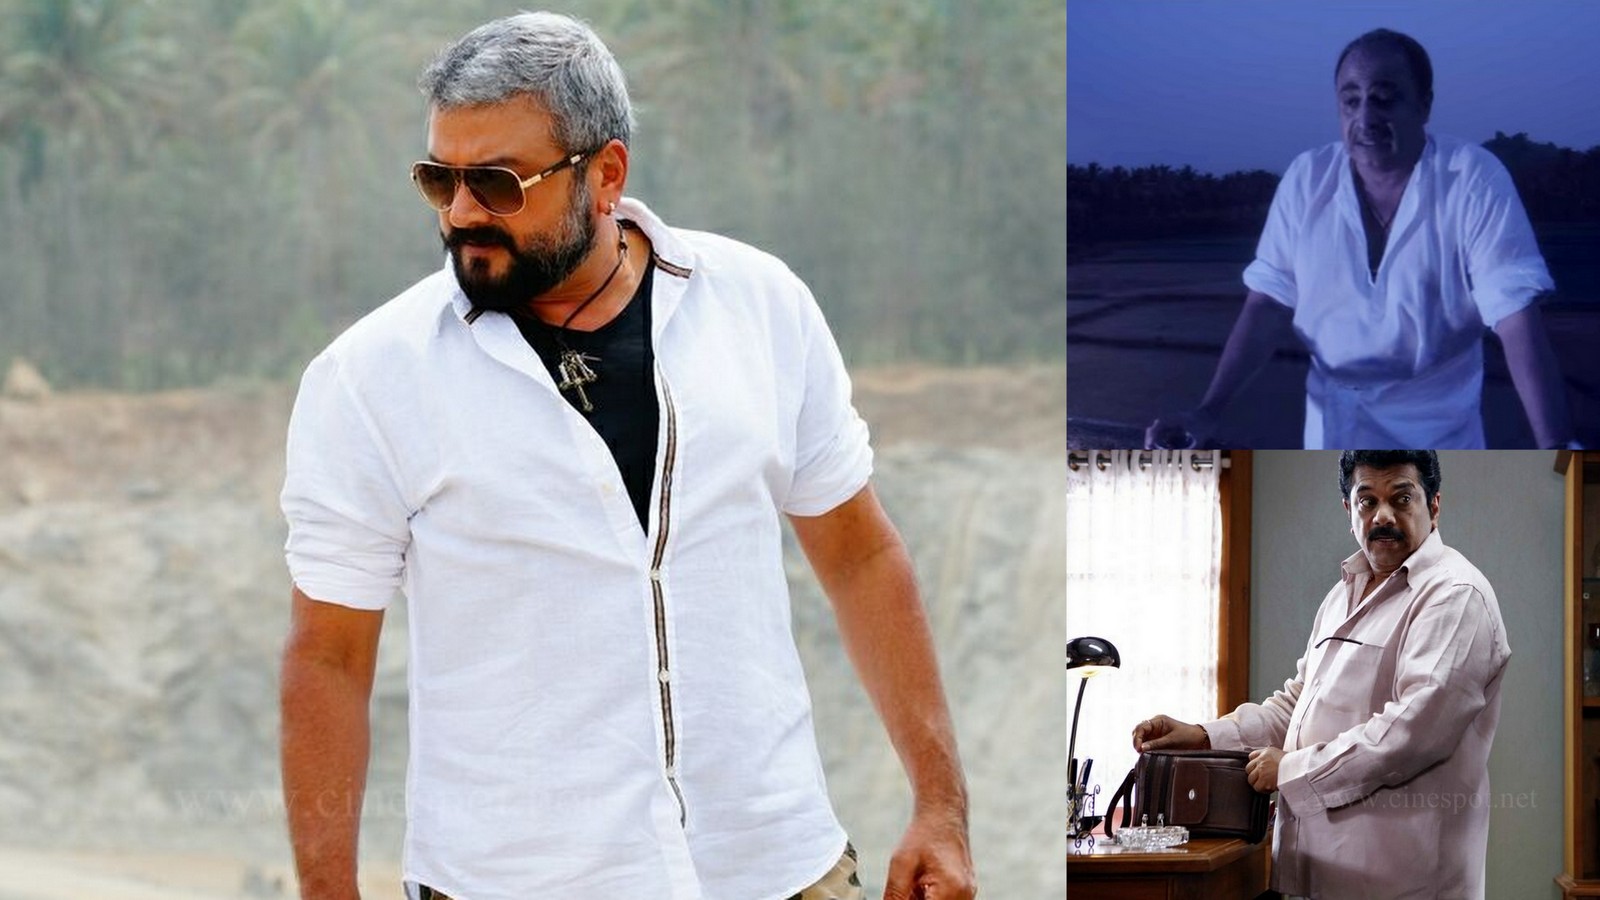 Jayaram has too many flops in Malayalam in recent years